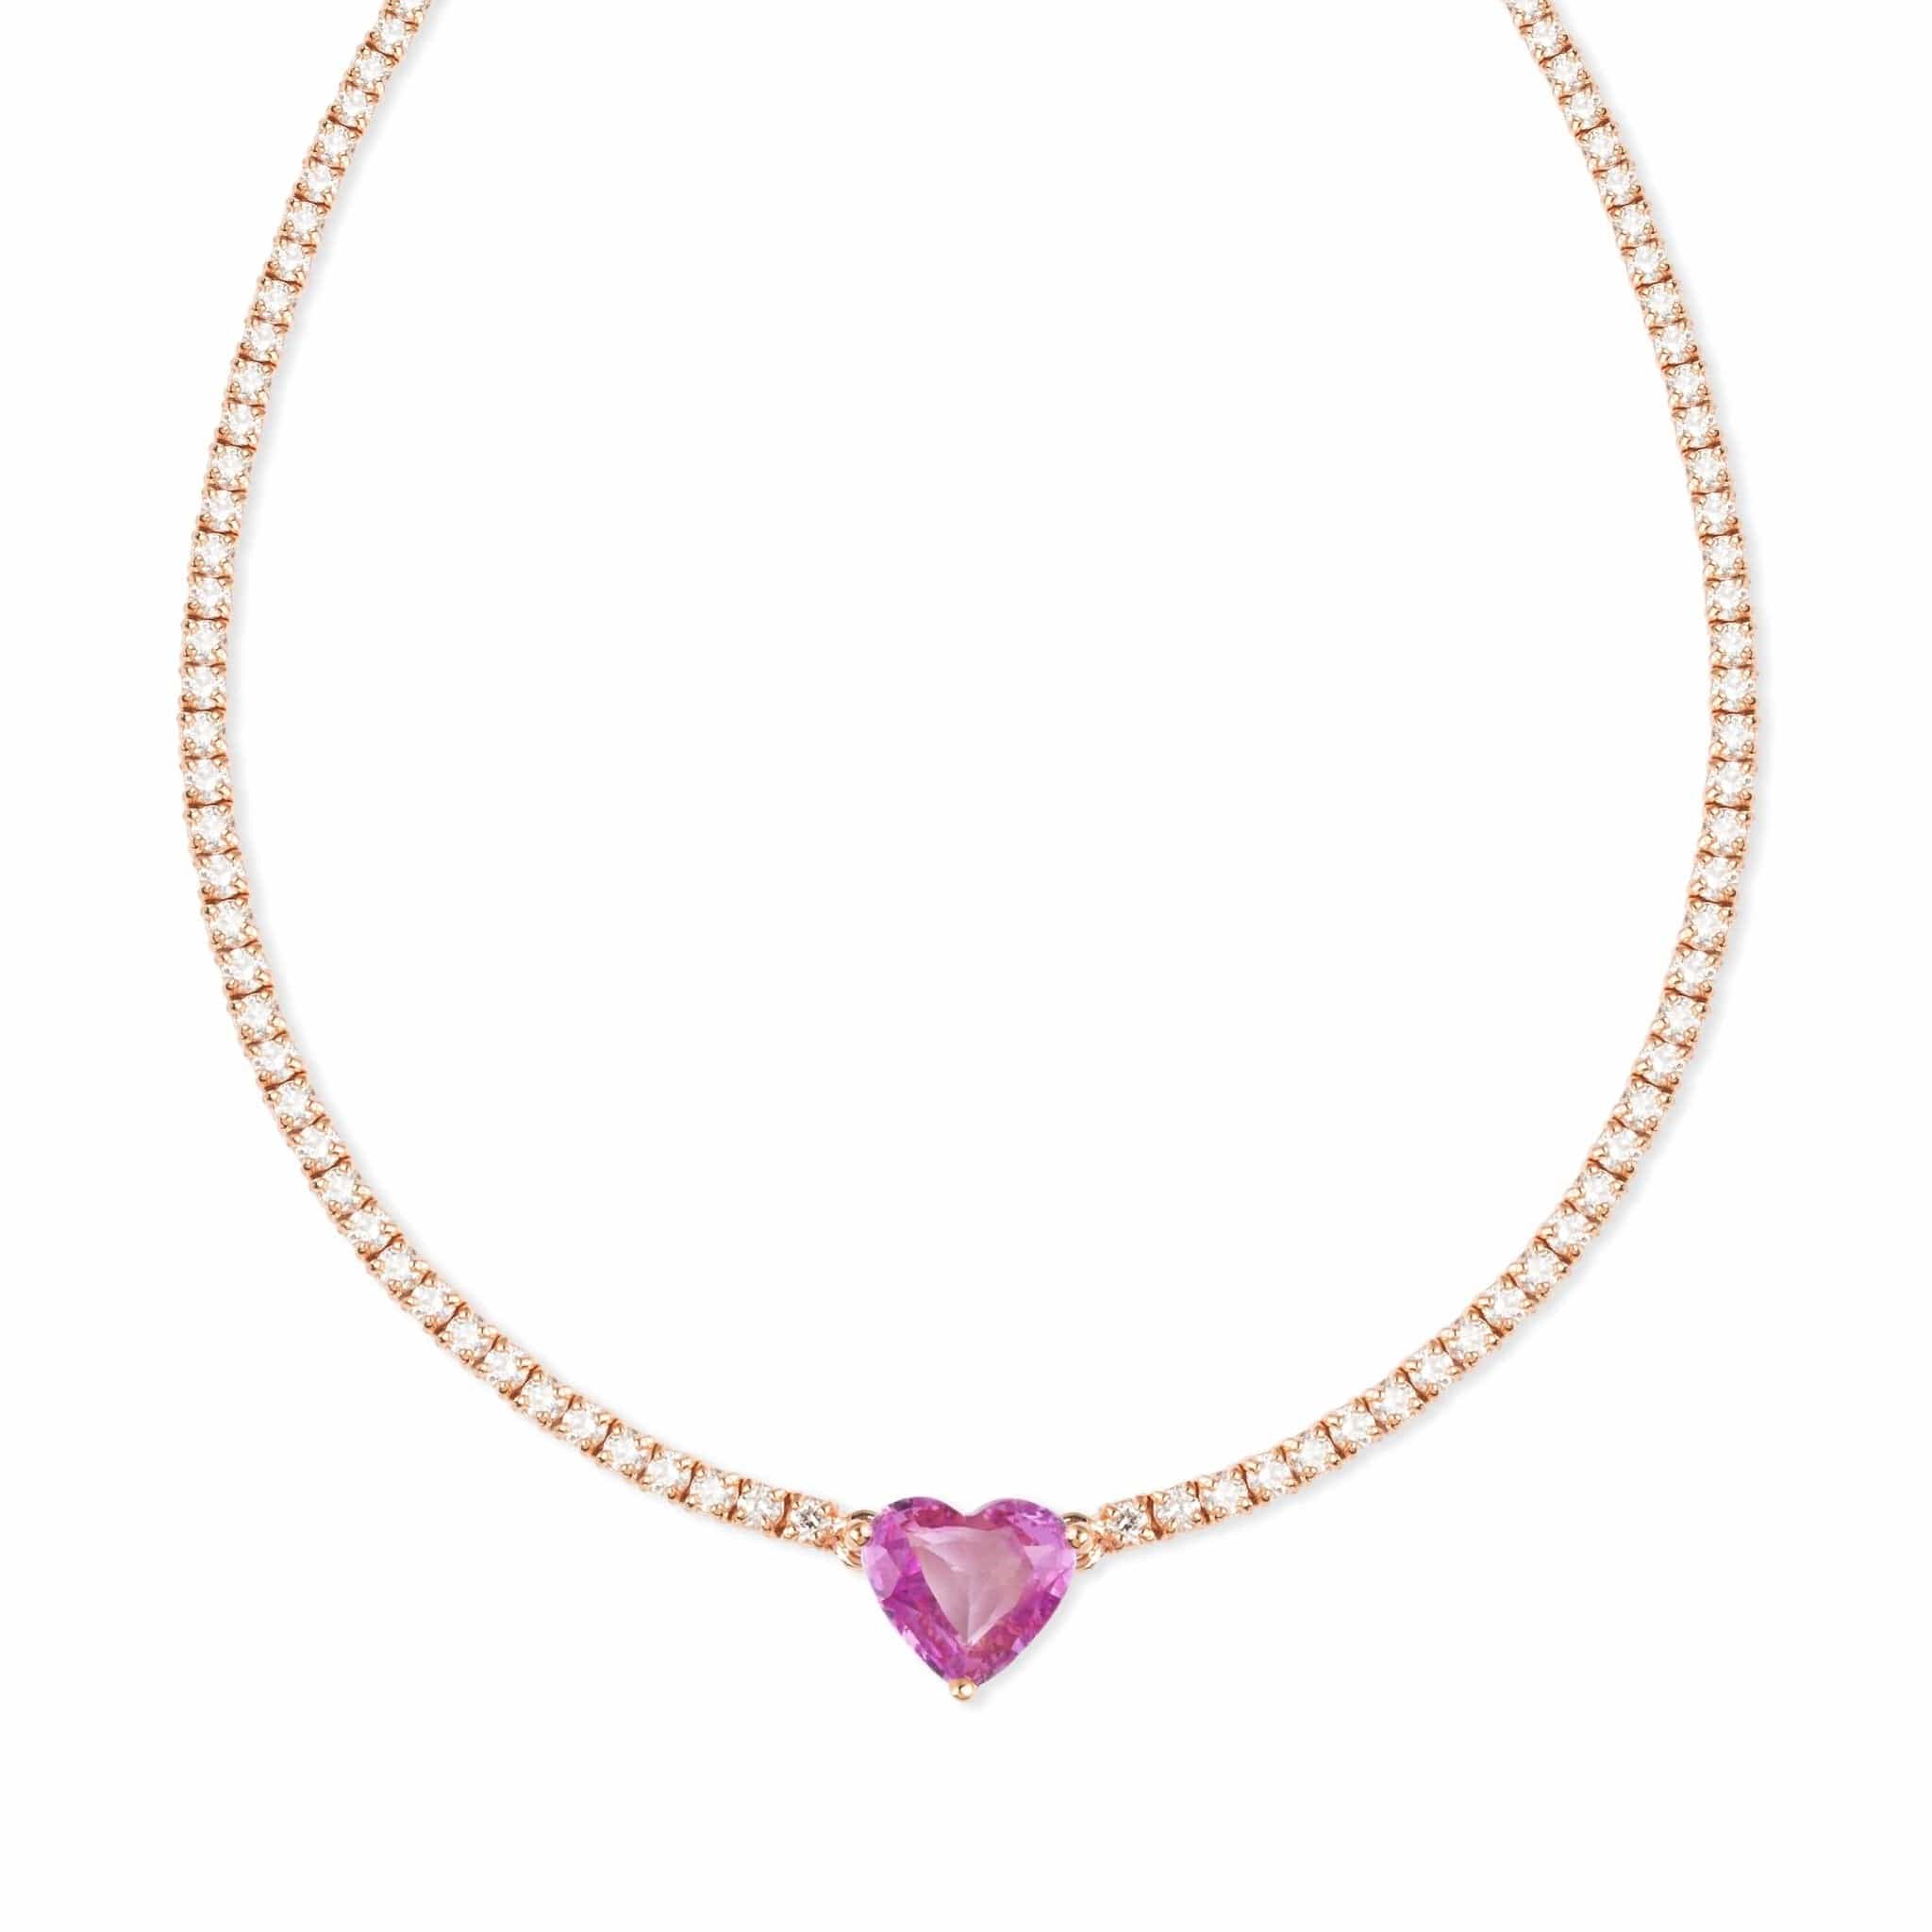 Pink Heart Necklace - M.Fitaihi